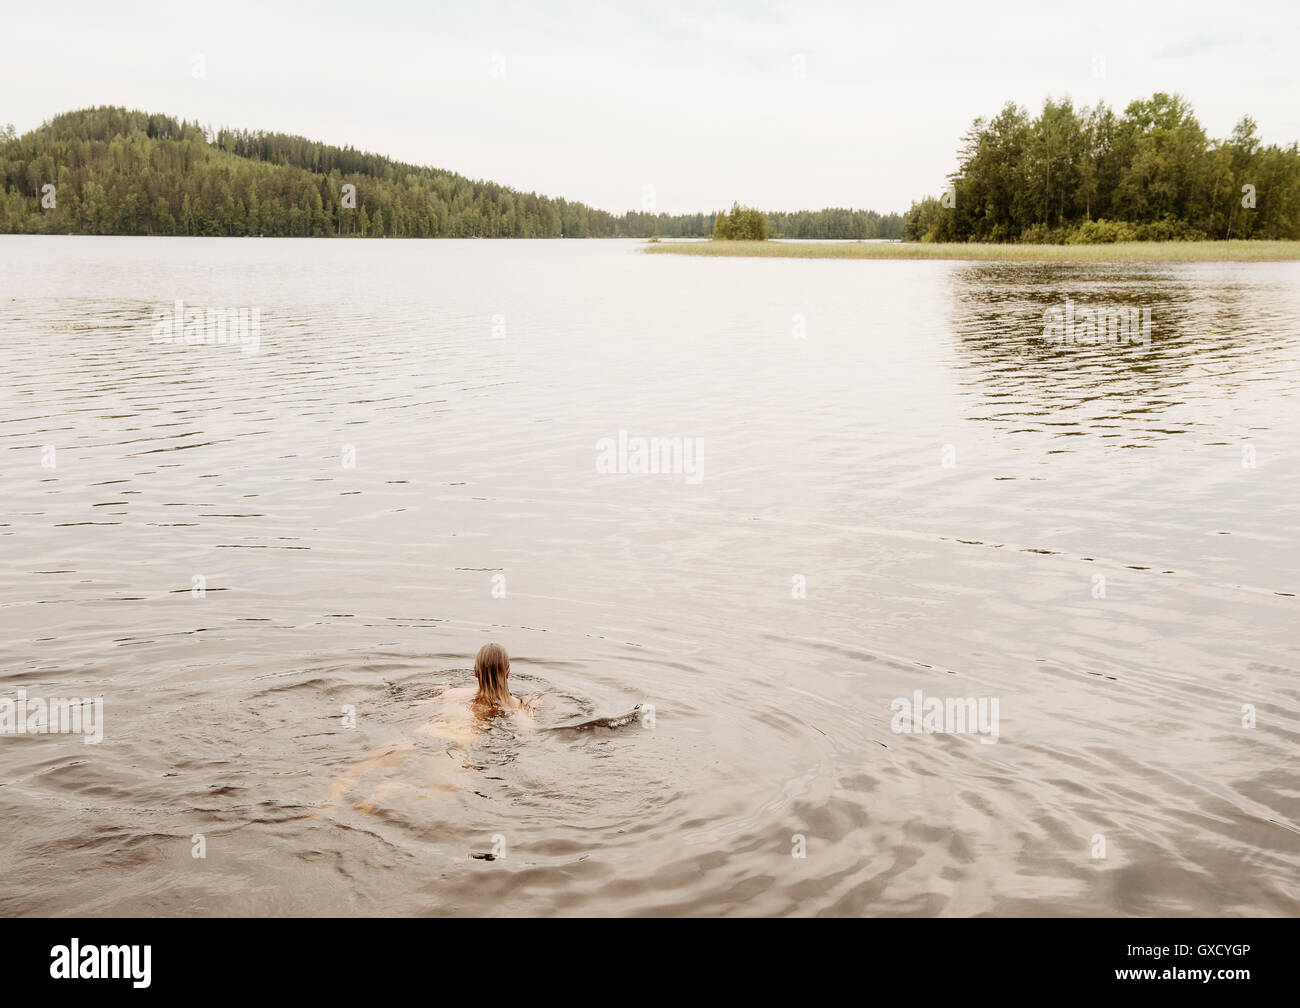 Woman swimming in lake, Orivesi, Finlande Banque D'Images